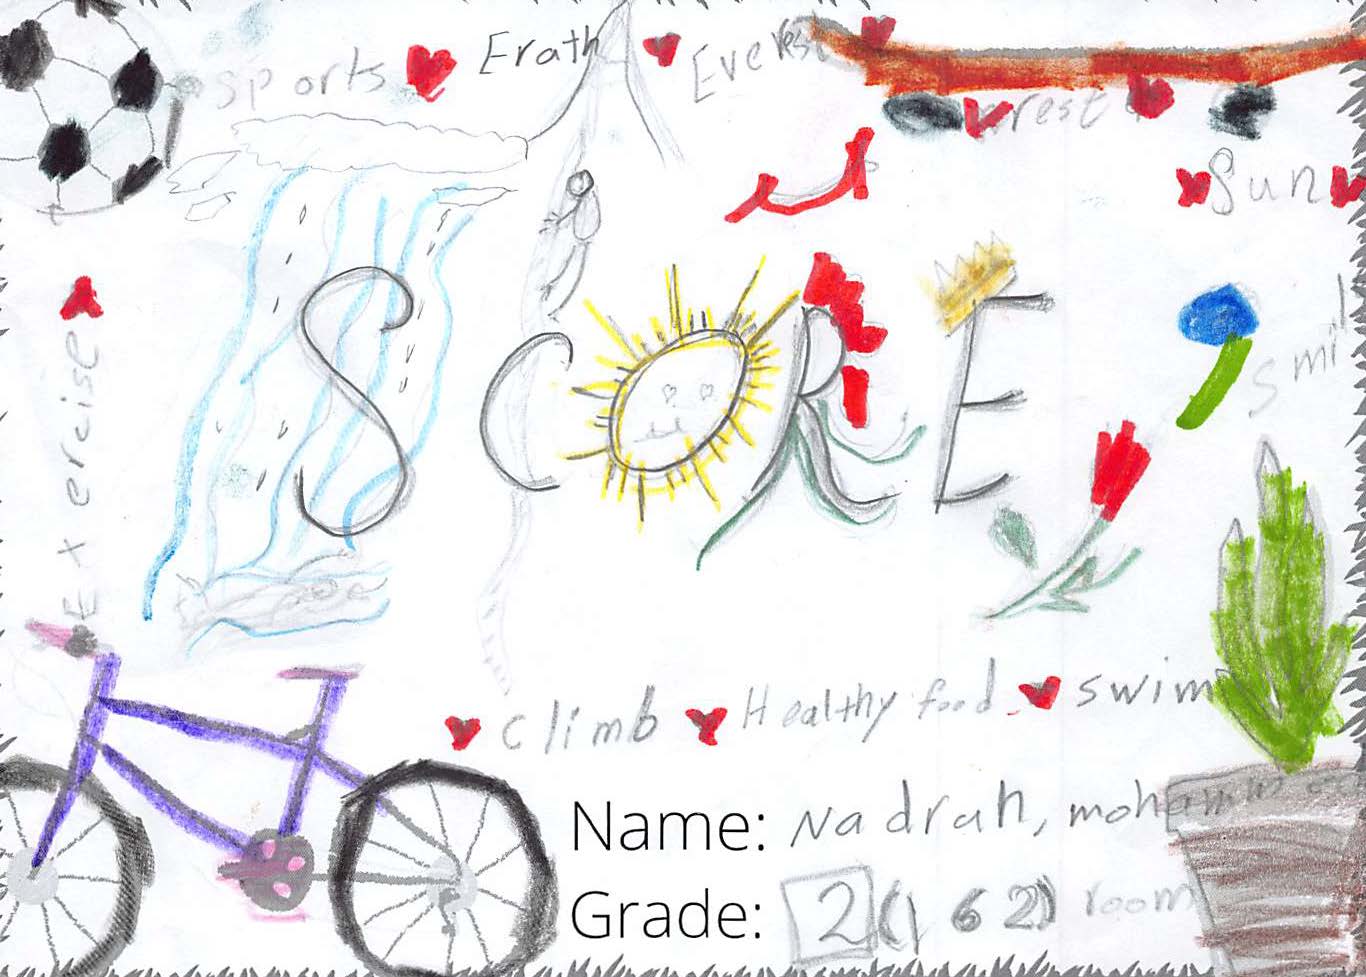 Pencil crayon drawing for the SCORE! logo contest. The drawing is colourful and includes a skateboard, the sun, plants, and more.